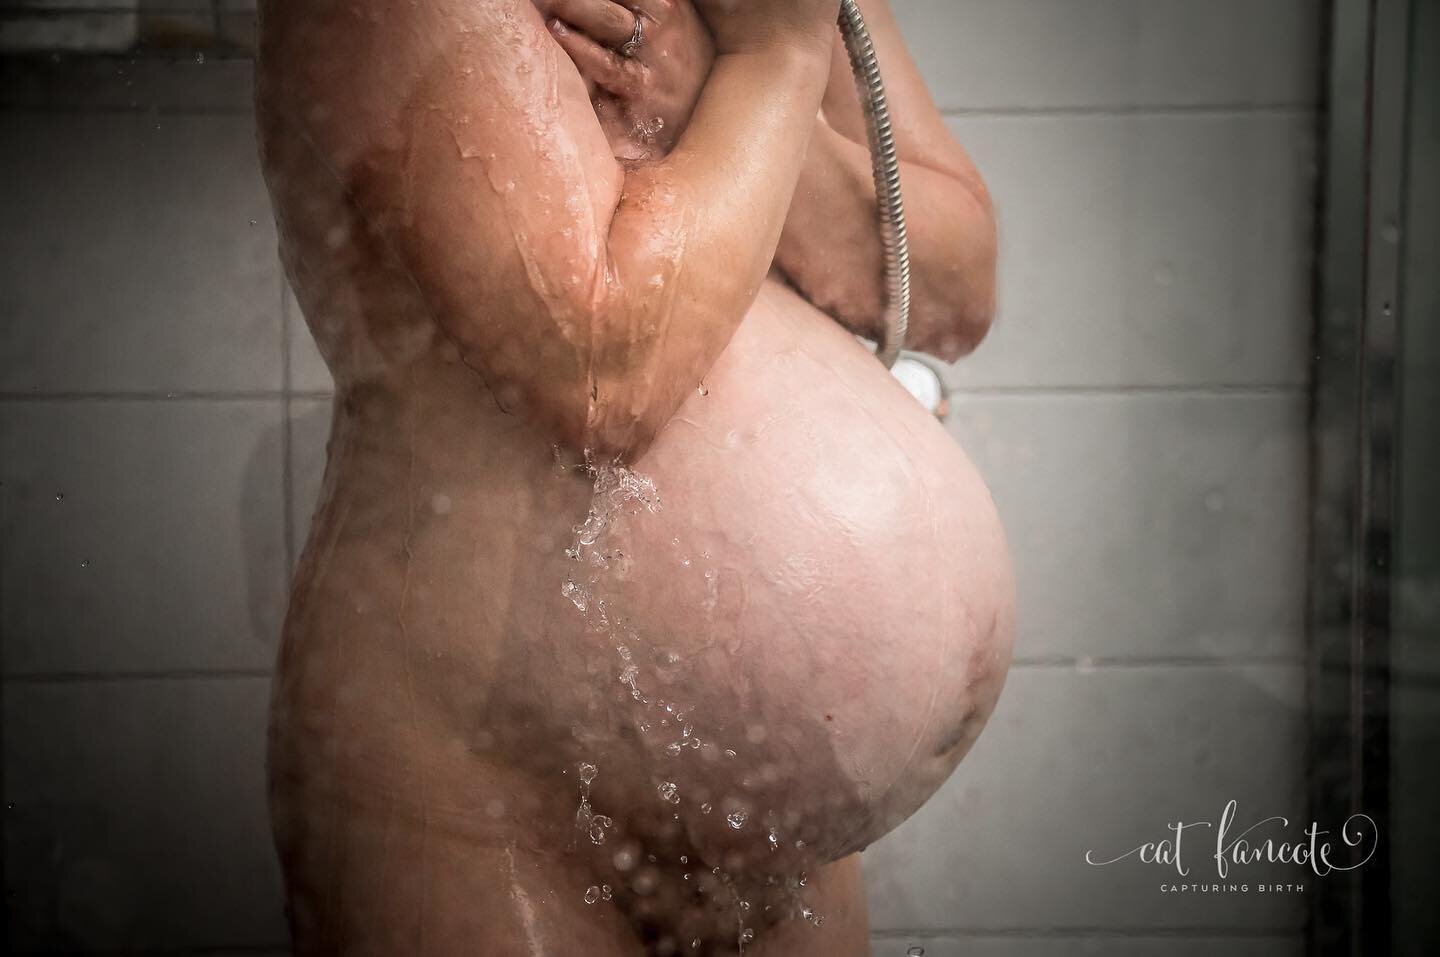 The water washed over her as she softened into herself 🌊 

#labourland #birthphotographyperth #catfancote #perthdoulaandphotographer #labourtips #birthsupport #perthbirthphotographer